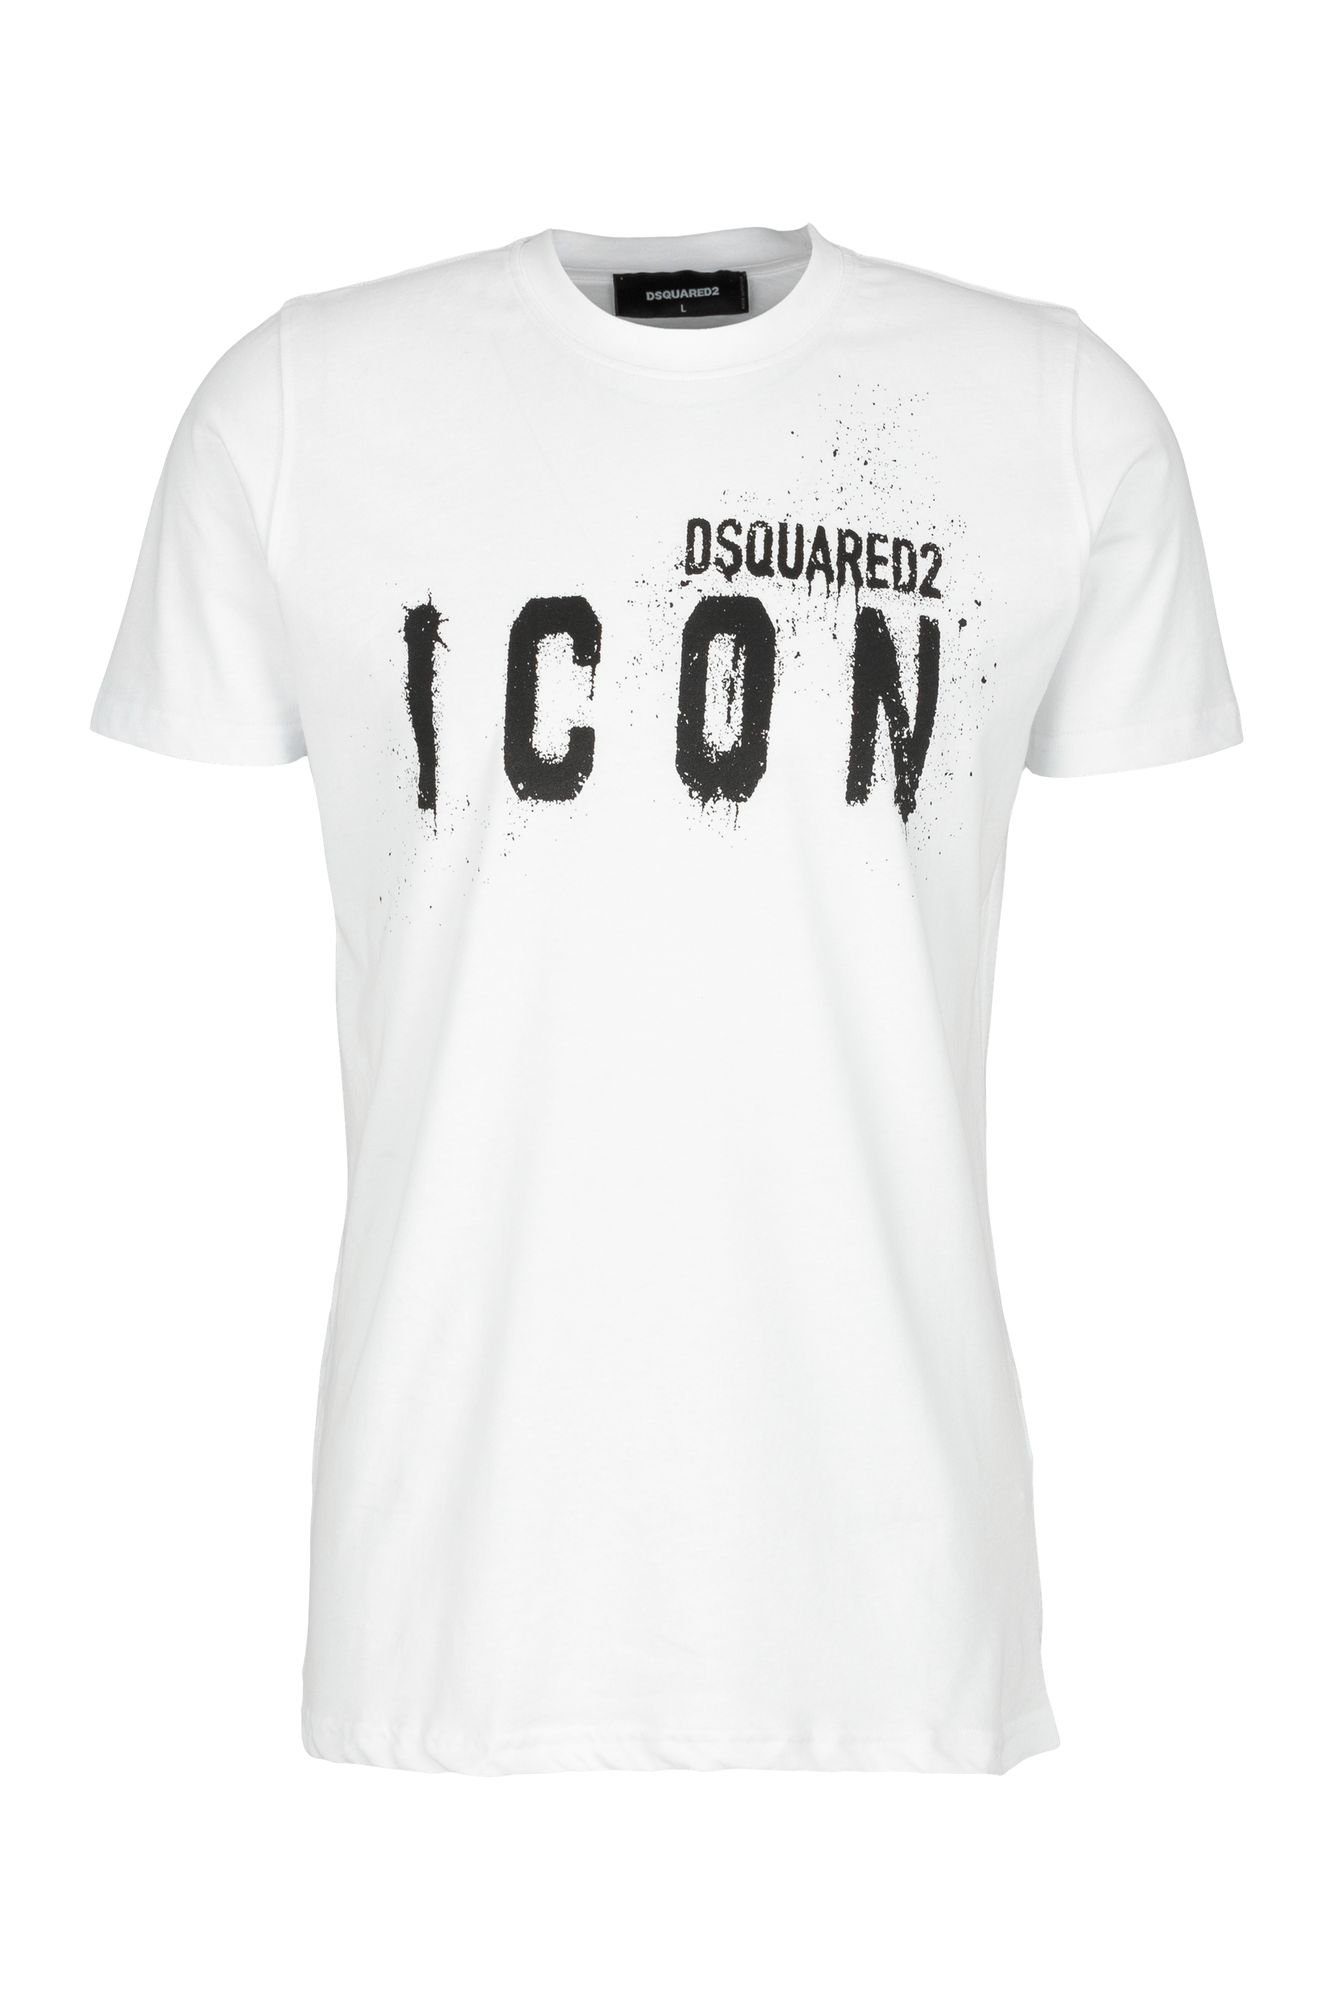 Dsquared2 T-Shirt Icon Spray Tee